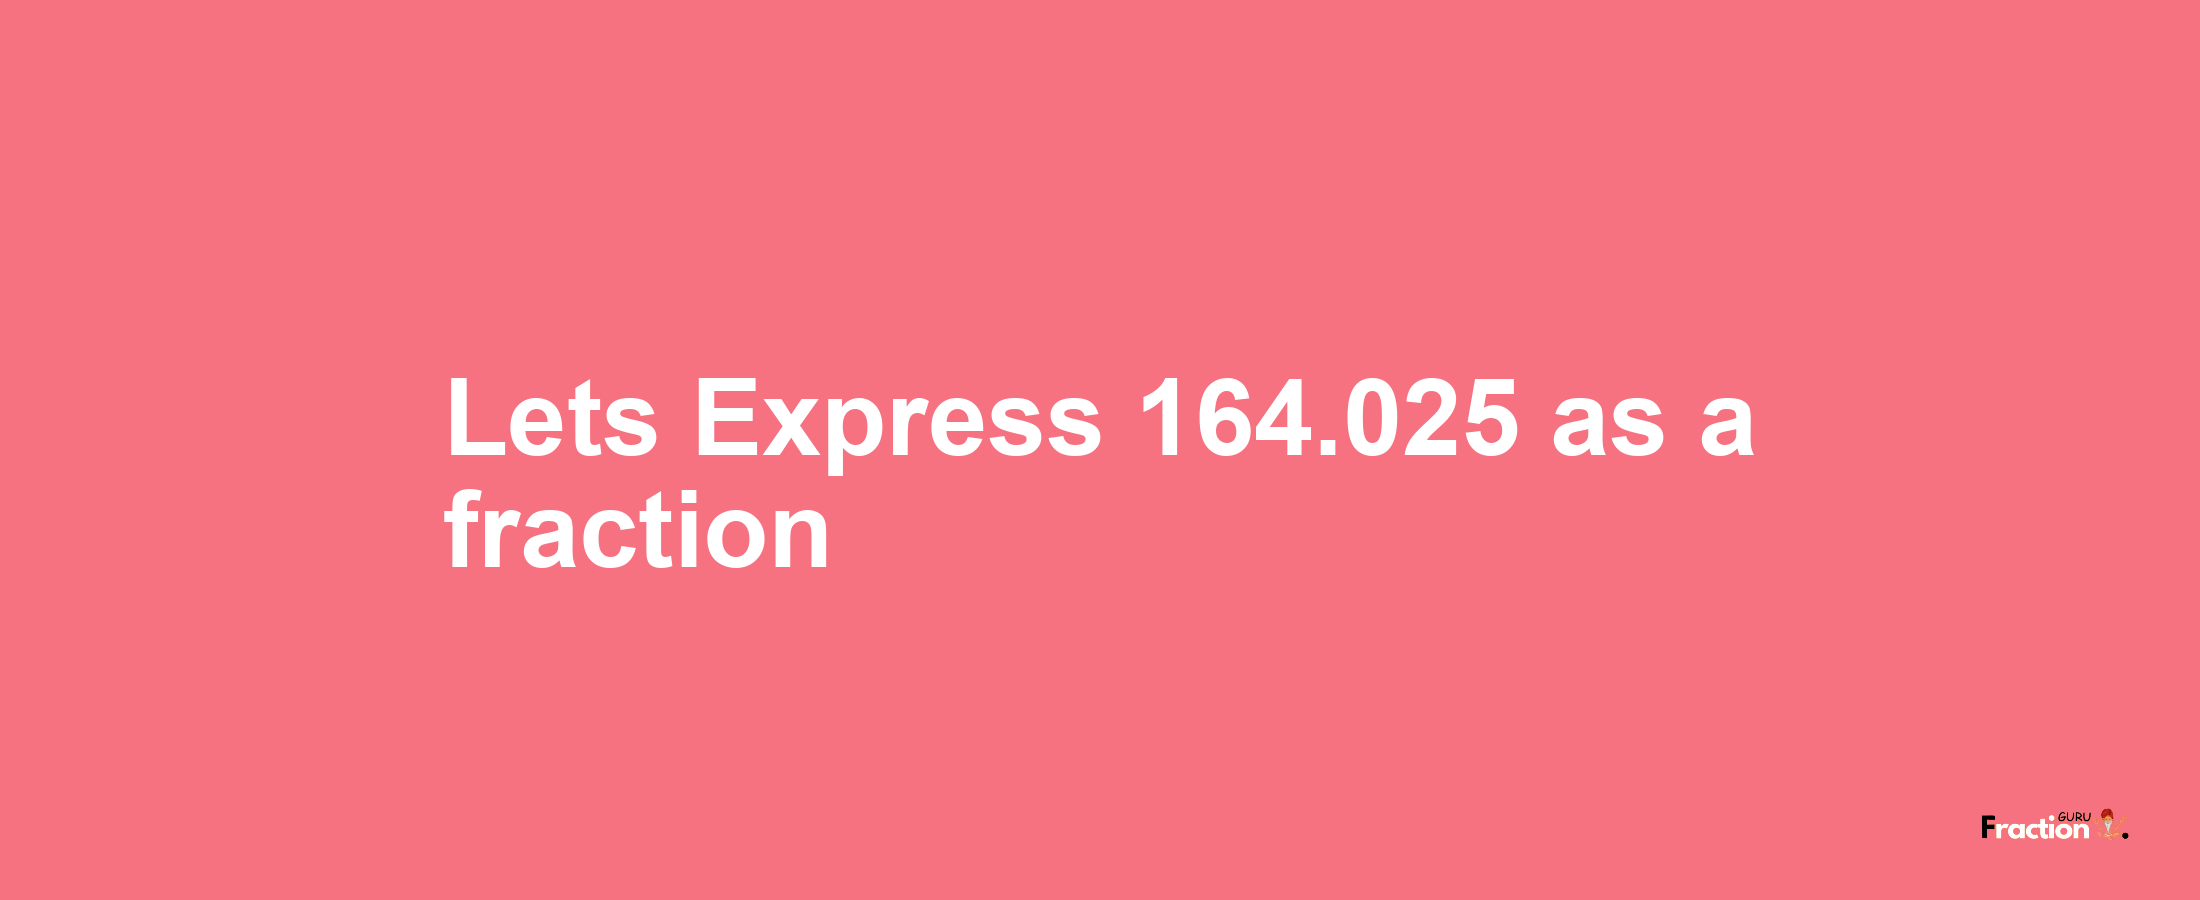 Lets Express 164.025 as afraction